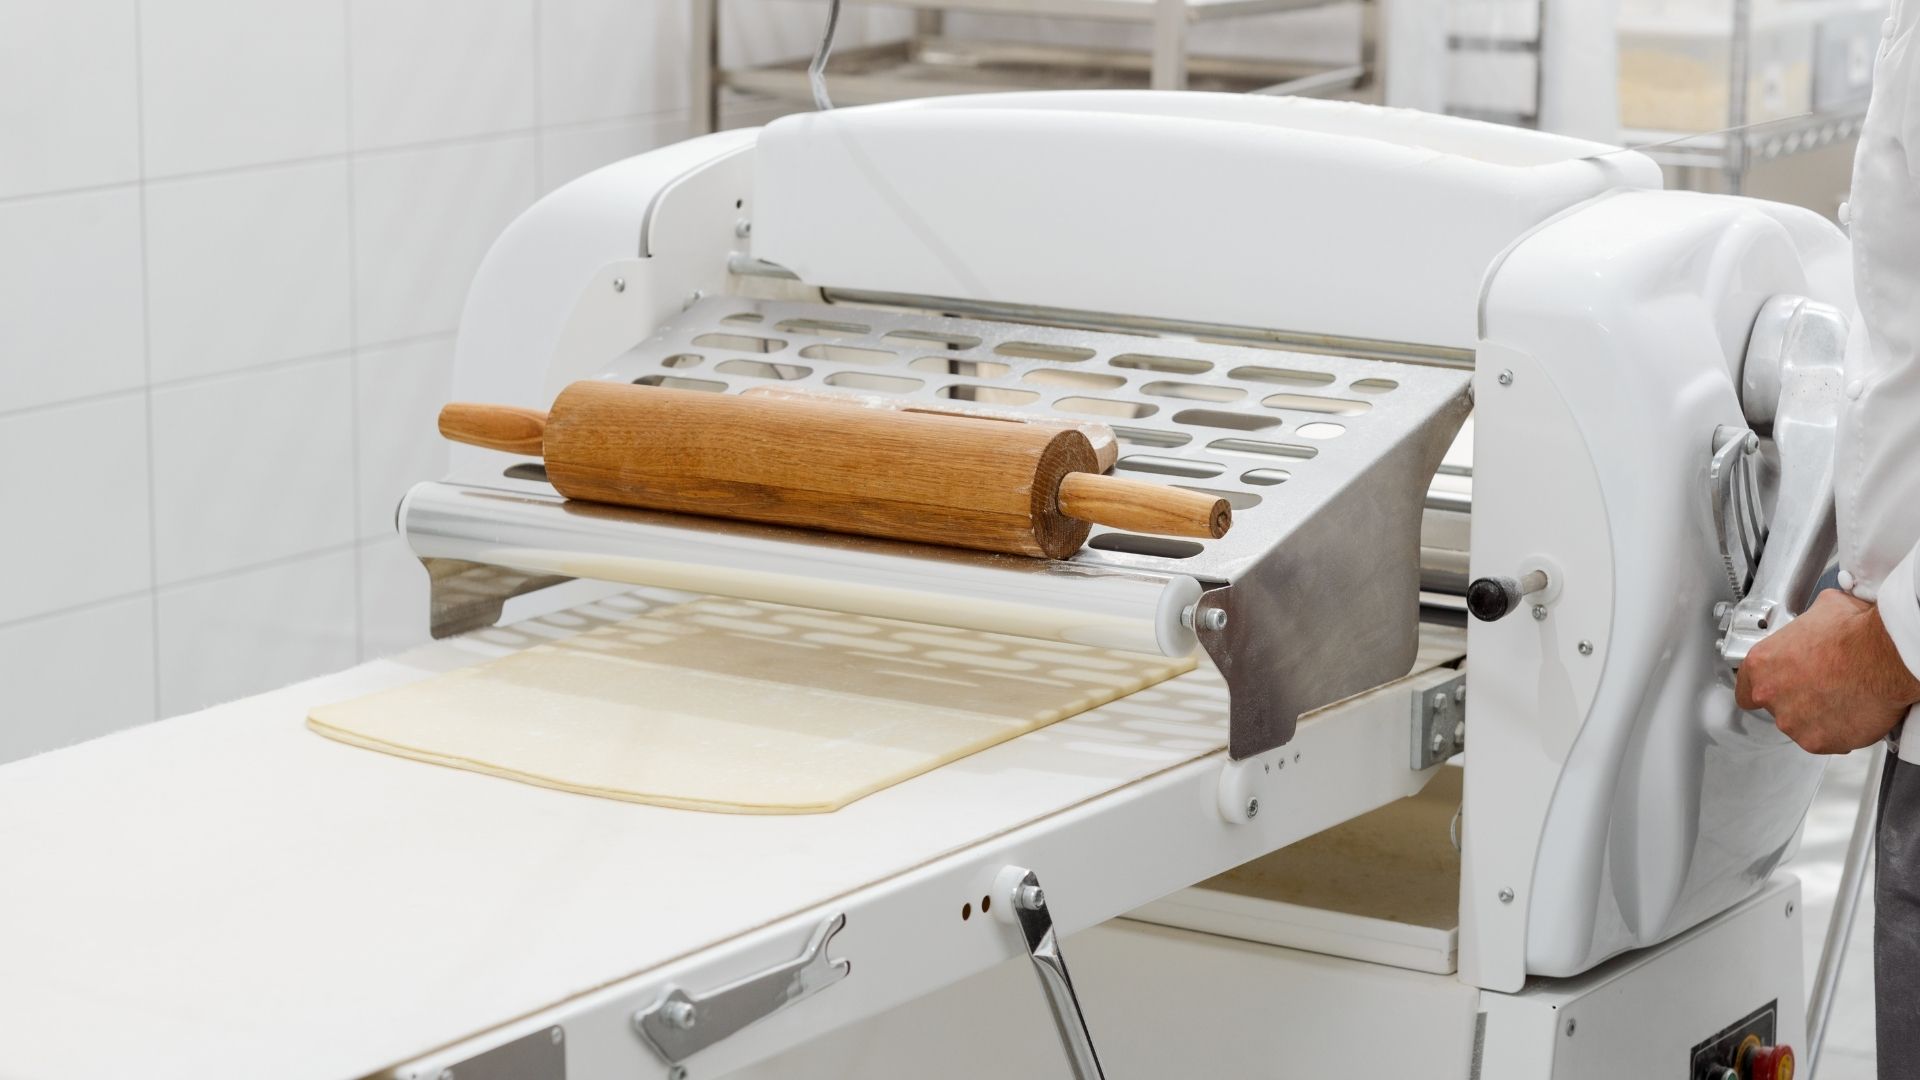 Dough Sheeters VS Manual Rolling: A Comparative Analysis